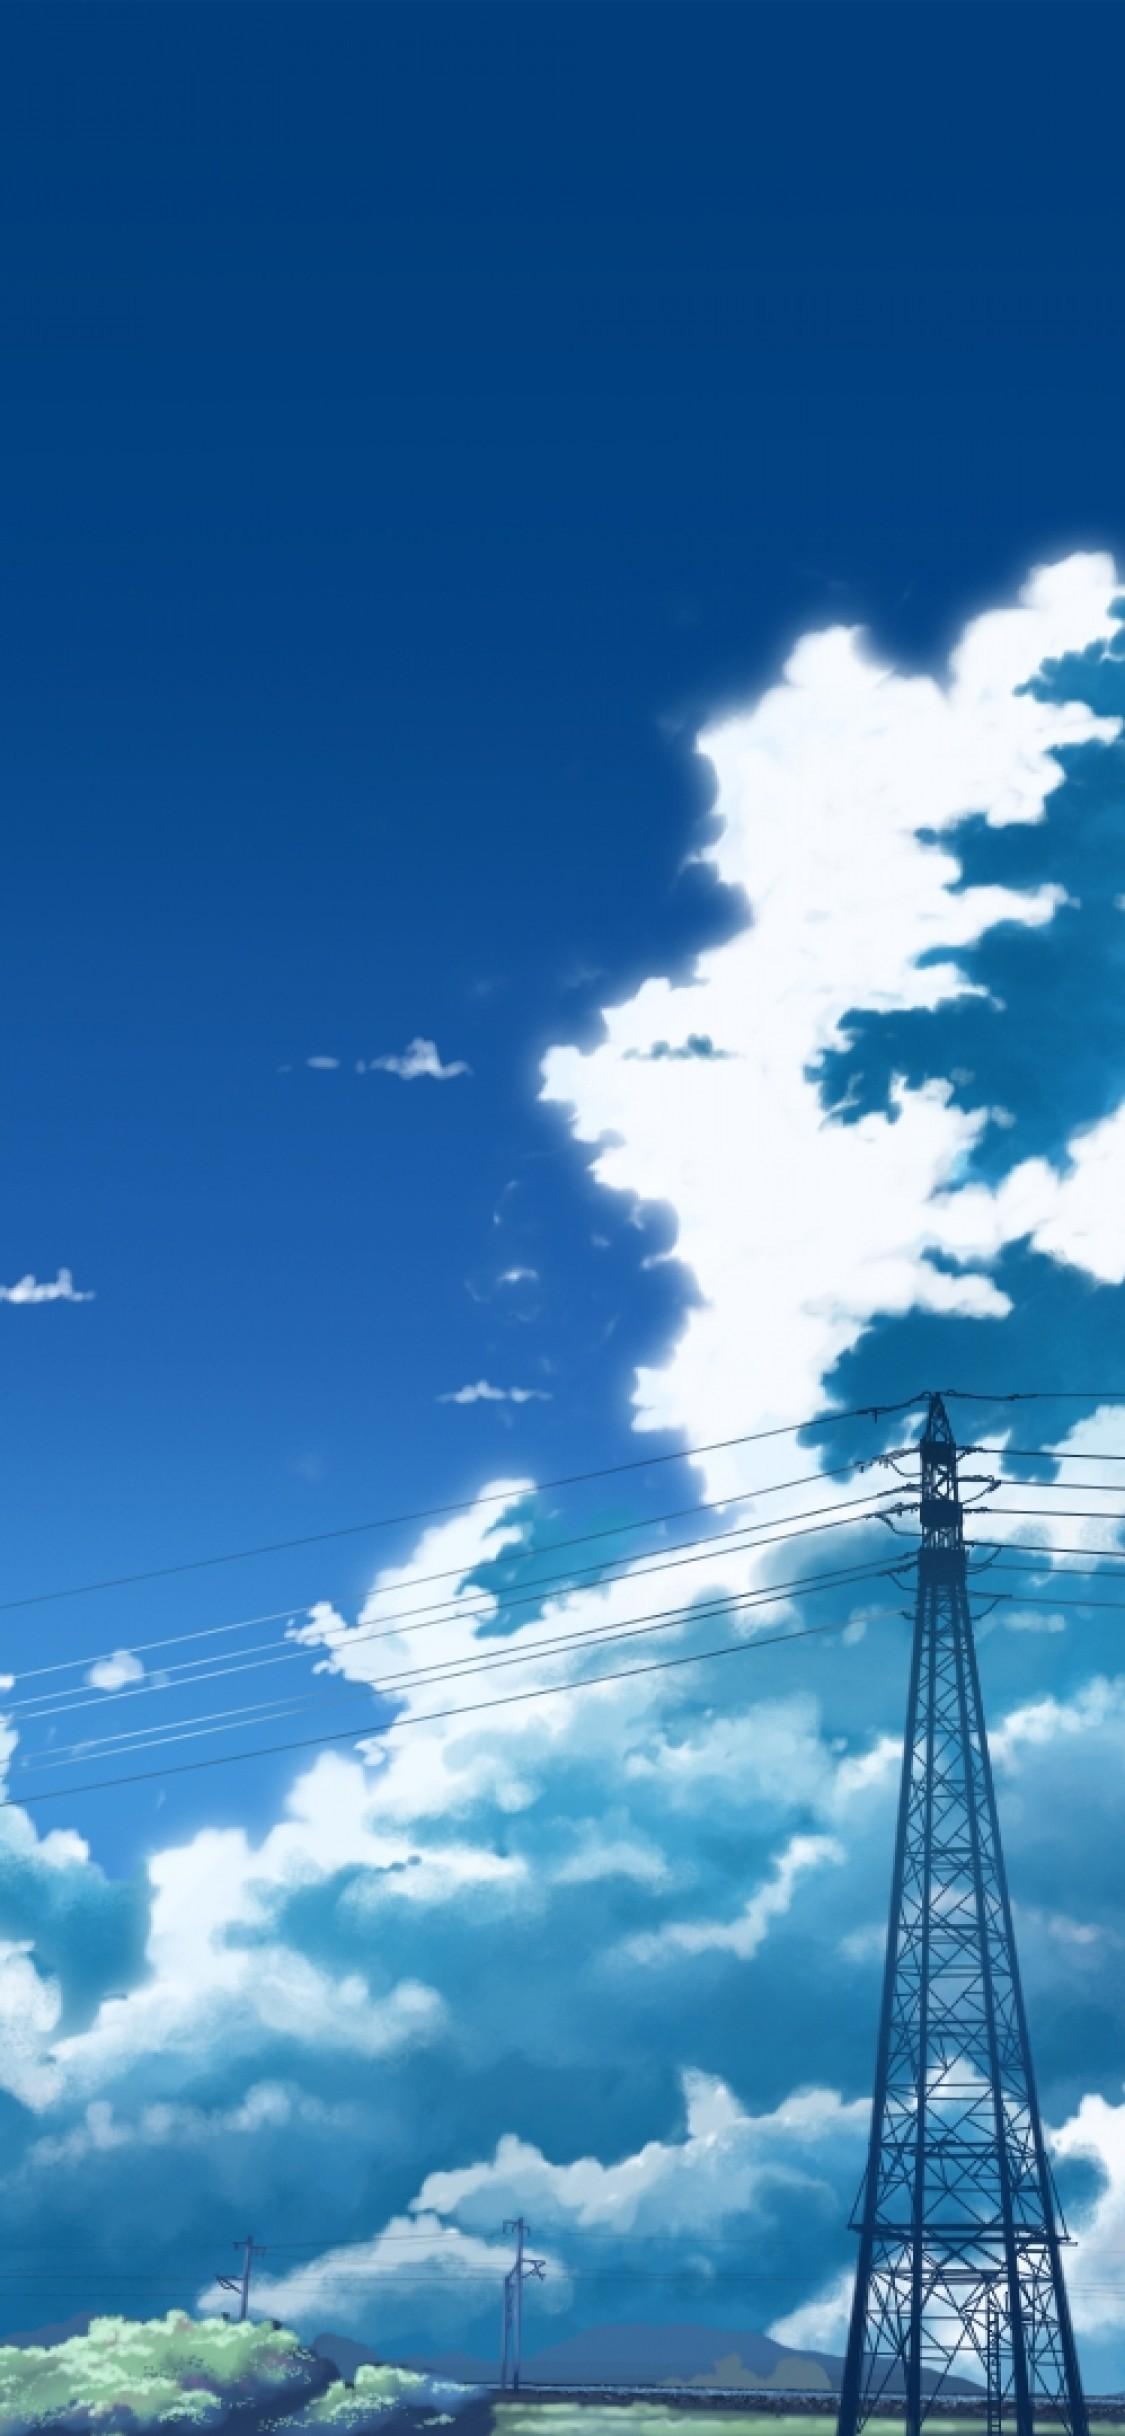 Download 1125x2436 Anime Sky, Anime Landscape, Clouds